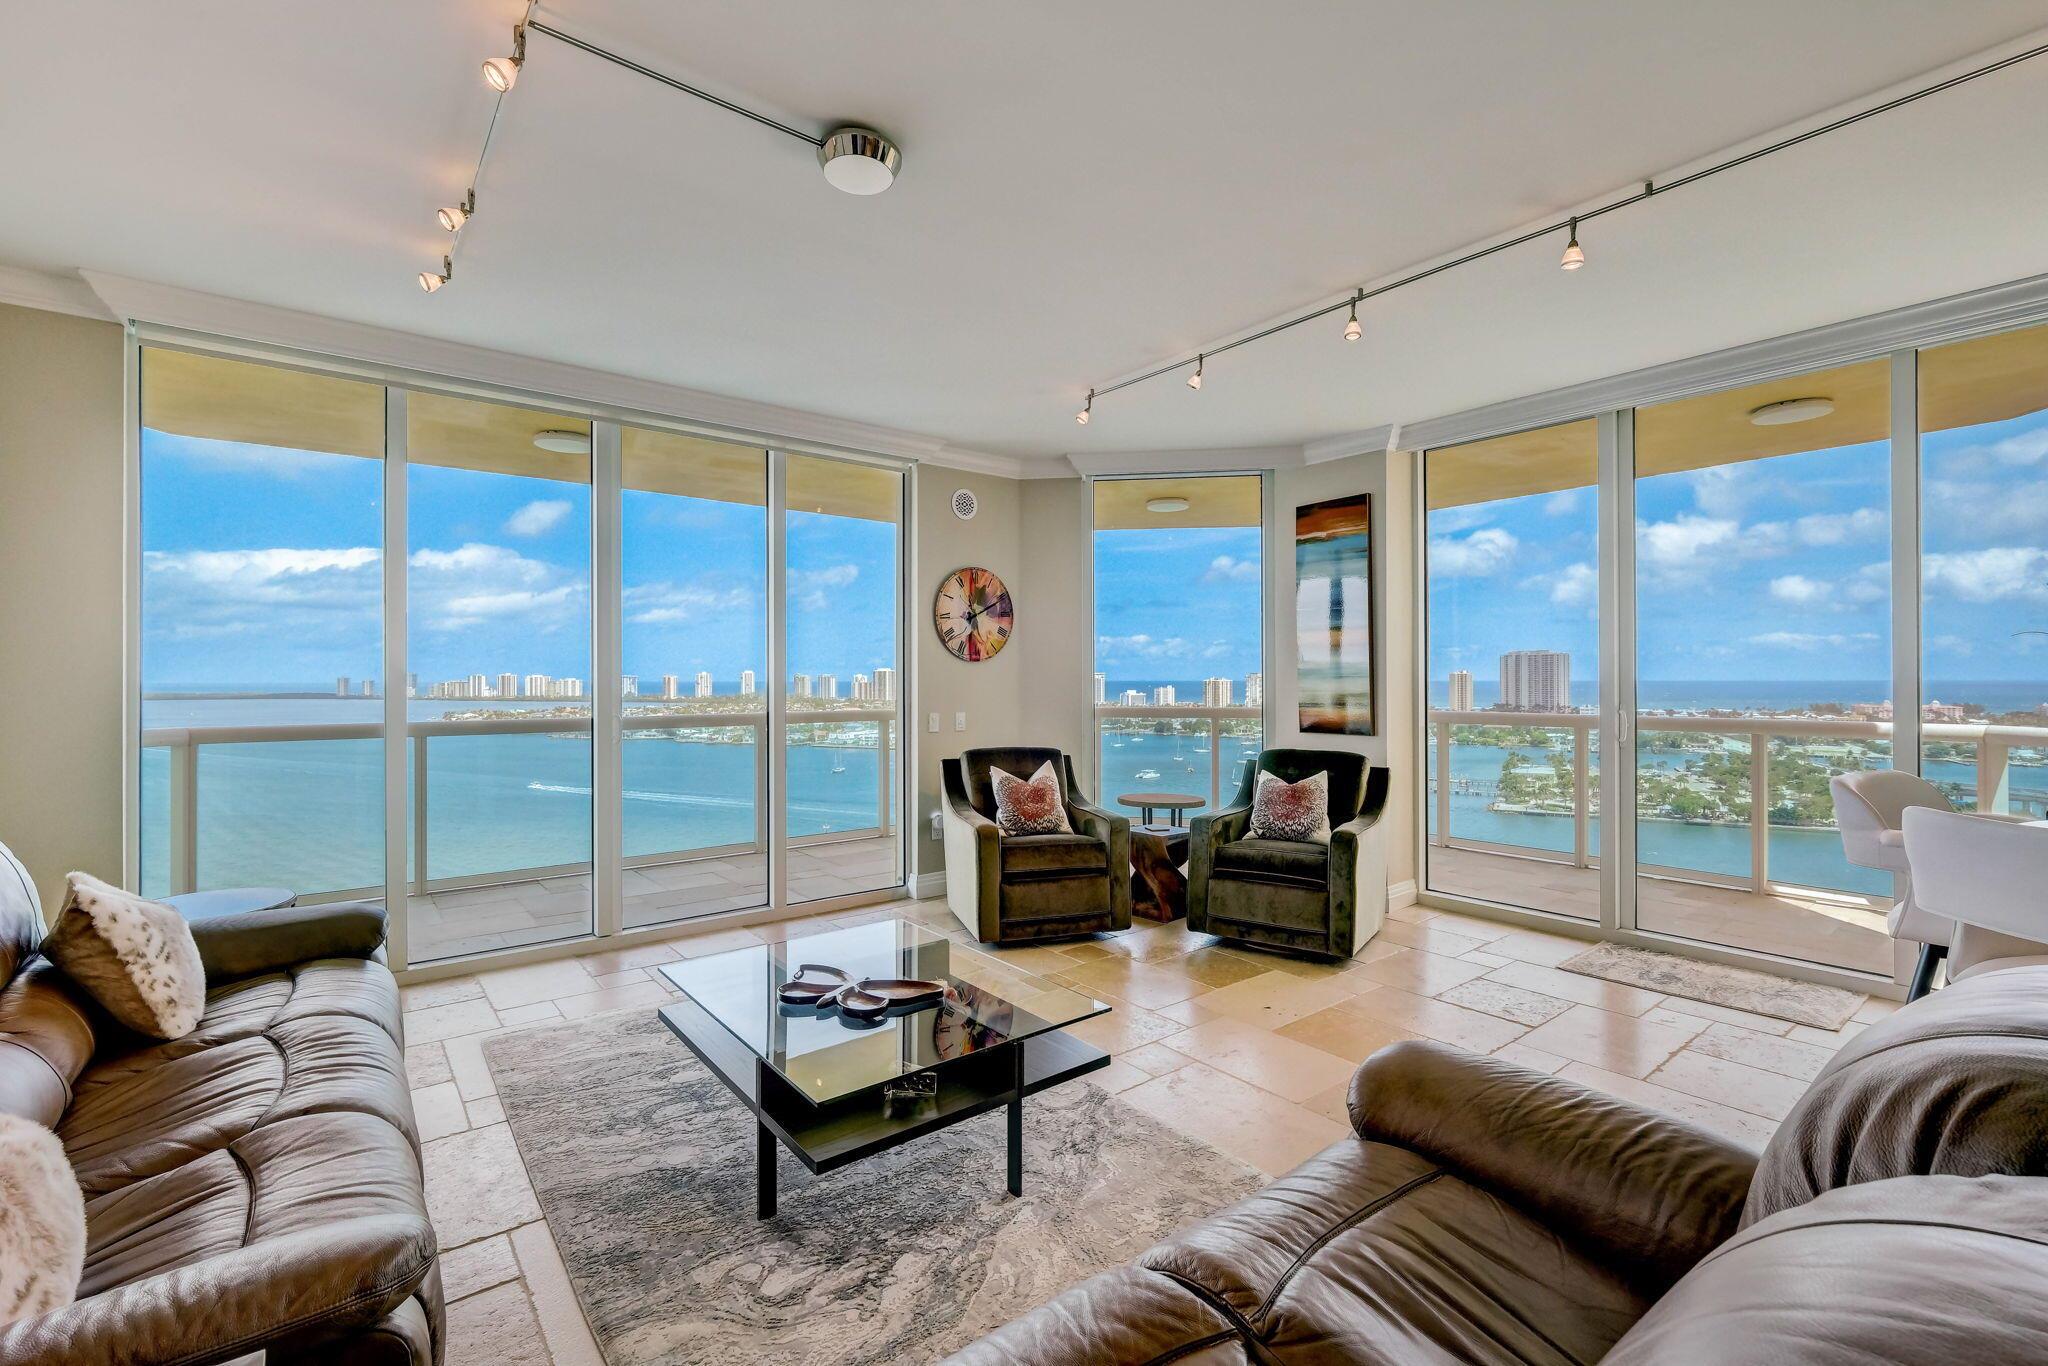 Indescribable direct intracoastal panoramic views of both the intracoastal & ocean. This custom designer home has 2594 sq ft of total living area. This 21st floor, with 3 bd 3 1/2 ba., plus den provides, French limestone floors through-out (NO CARPET) ALL custom baths, new frameless shower doors, newer AC, gorgeous custom Downsview kitchen, includes, Miele appliances, Thermador induction cooktop, new custom panel subzero refrig/freezer, wine refrig., built-in Miele coffee maker, uniquely designed marble island, 2 sets of European wood doors, crown molding throughout, Hunter Douglas remote shades, 4 1/2 inch shutter, closet organizers  in ALL closets, new Toto toilets, new washer/dryer and MUCH MORE!!This condo has been completely renovated to feel like a home in Palm Beach Island at an affordable price! In addition, Marina Grande offers the finest amenities, new pool, whirlpool, tennis courts, 4 pickleball courts, bocce ball, barbecues, fitness center with a sauna and steam room, large social room for entertaining with the community or a private party, billiard room, card room and a full-service marina adjacent to the property. Walk to the Publix across the street and a 5-10 min. walk to the beach.